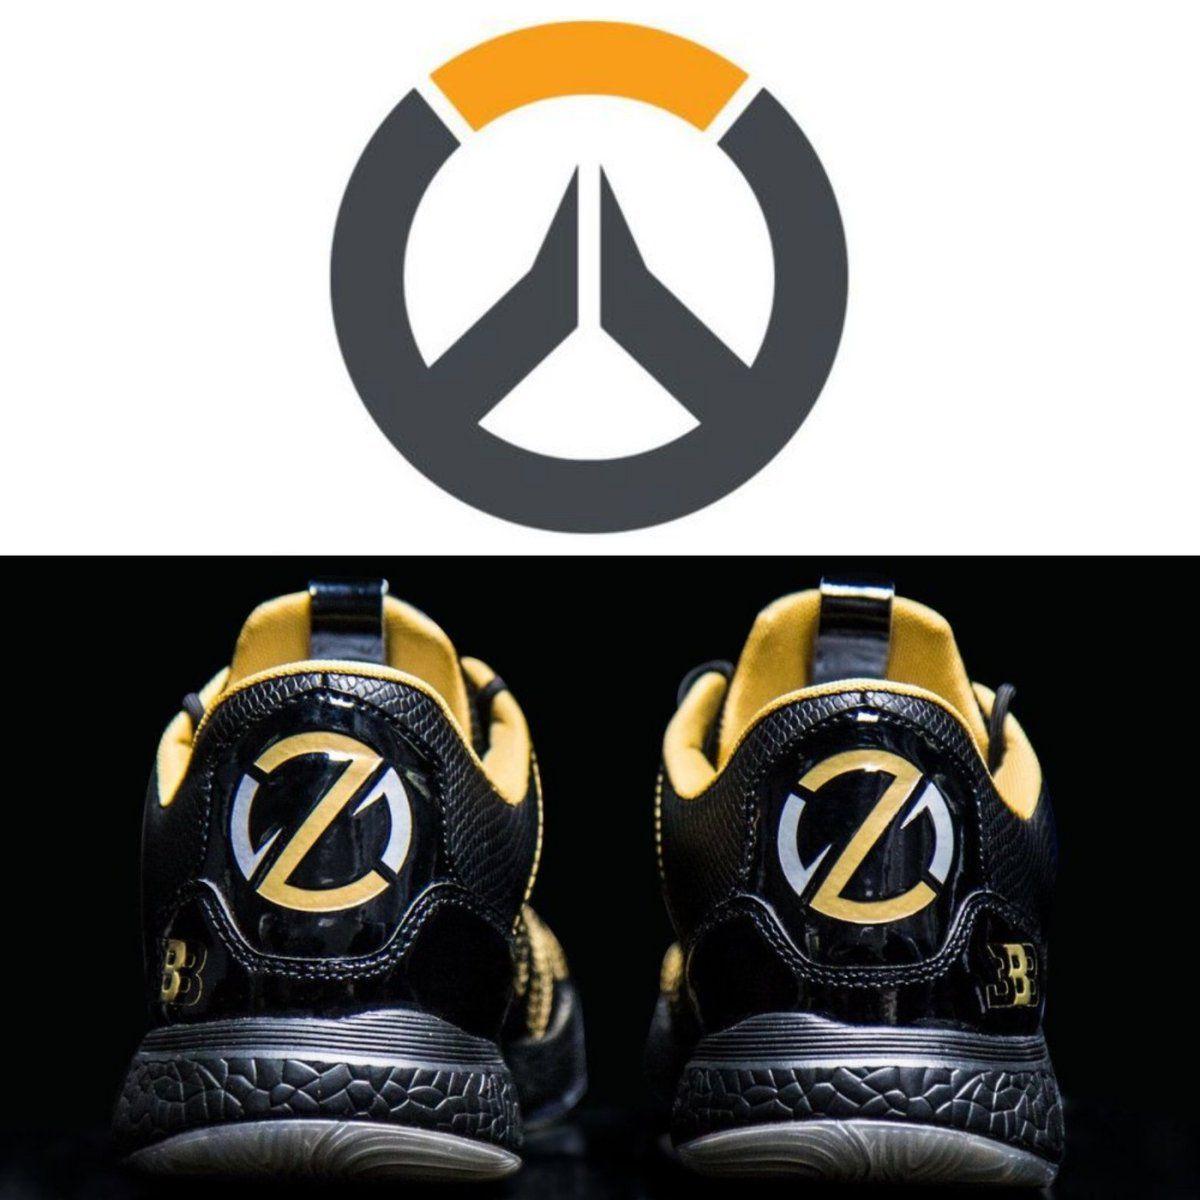 ZO2 Logo - Steven Manners it just me or does the #ZO2 logo